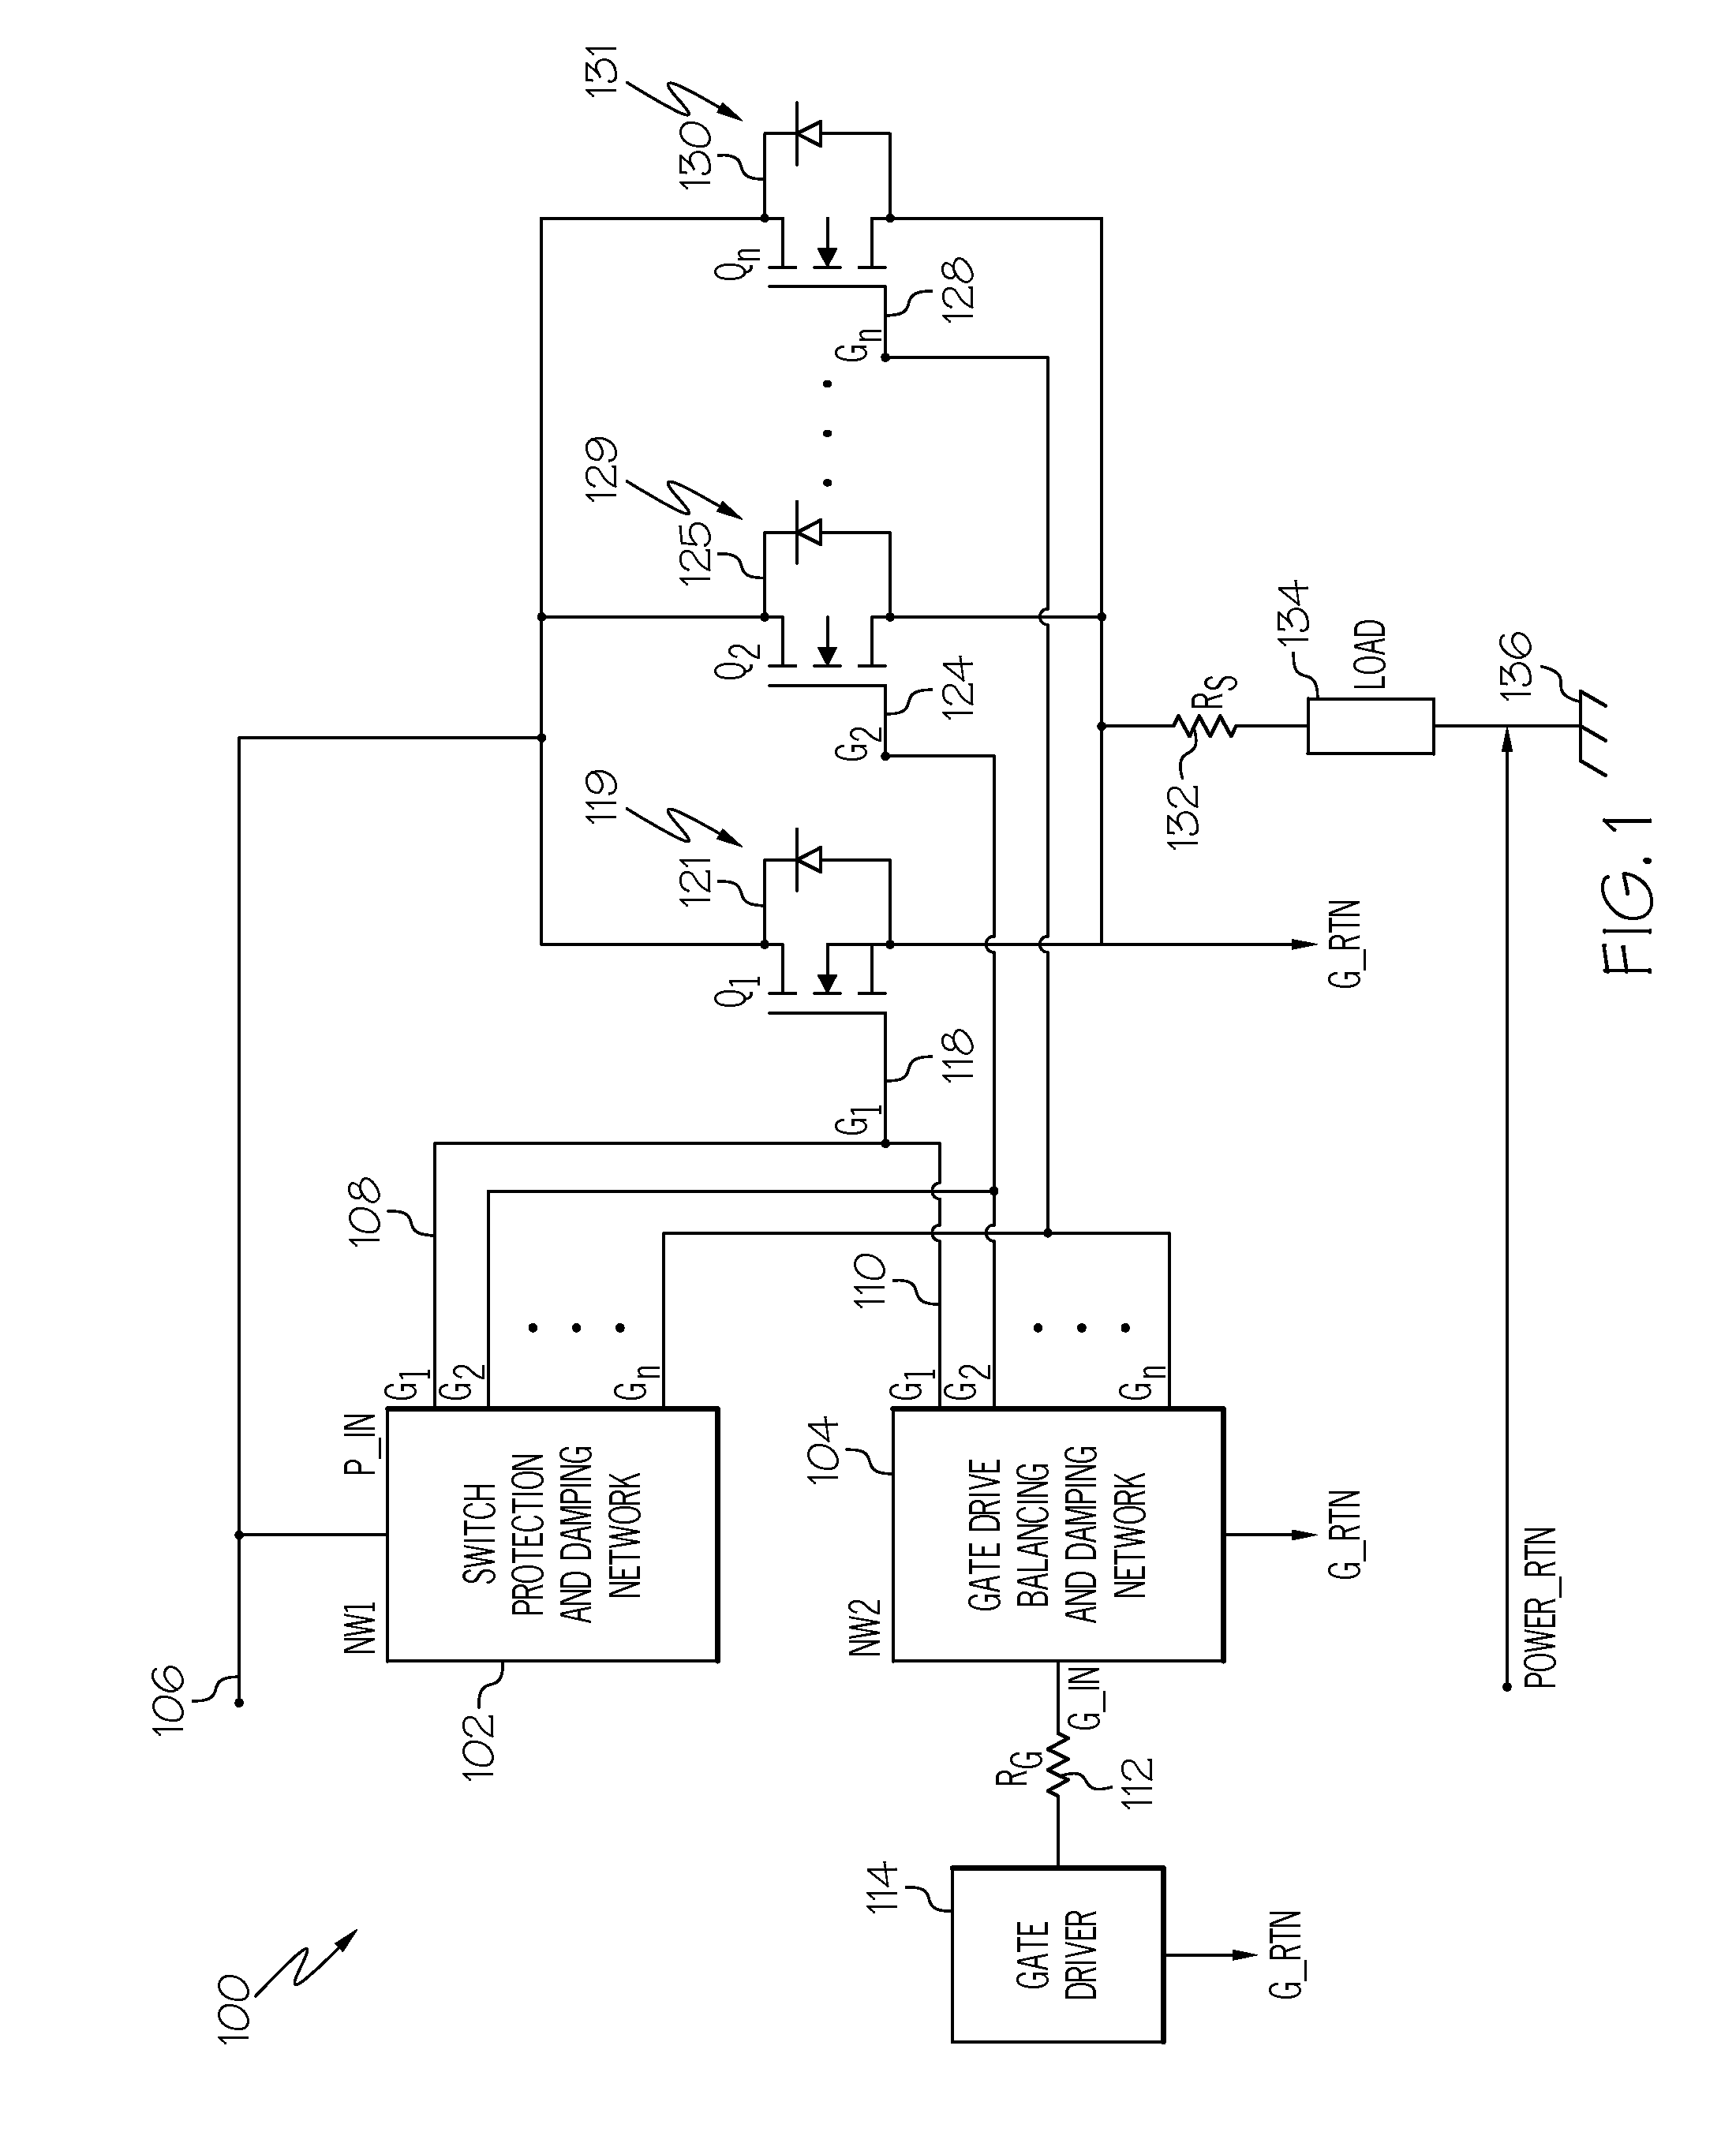 Approach for driving multiple MOSFETs in parallel for high power solid state power controller applications